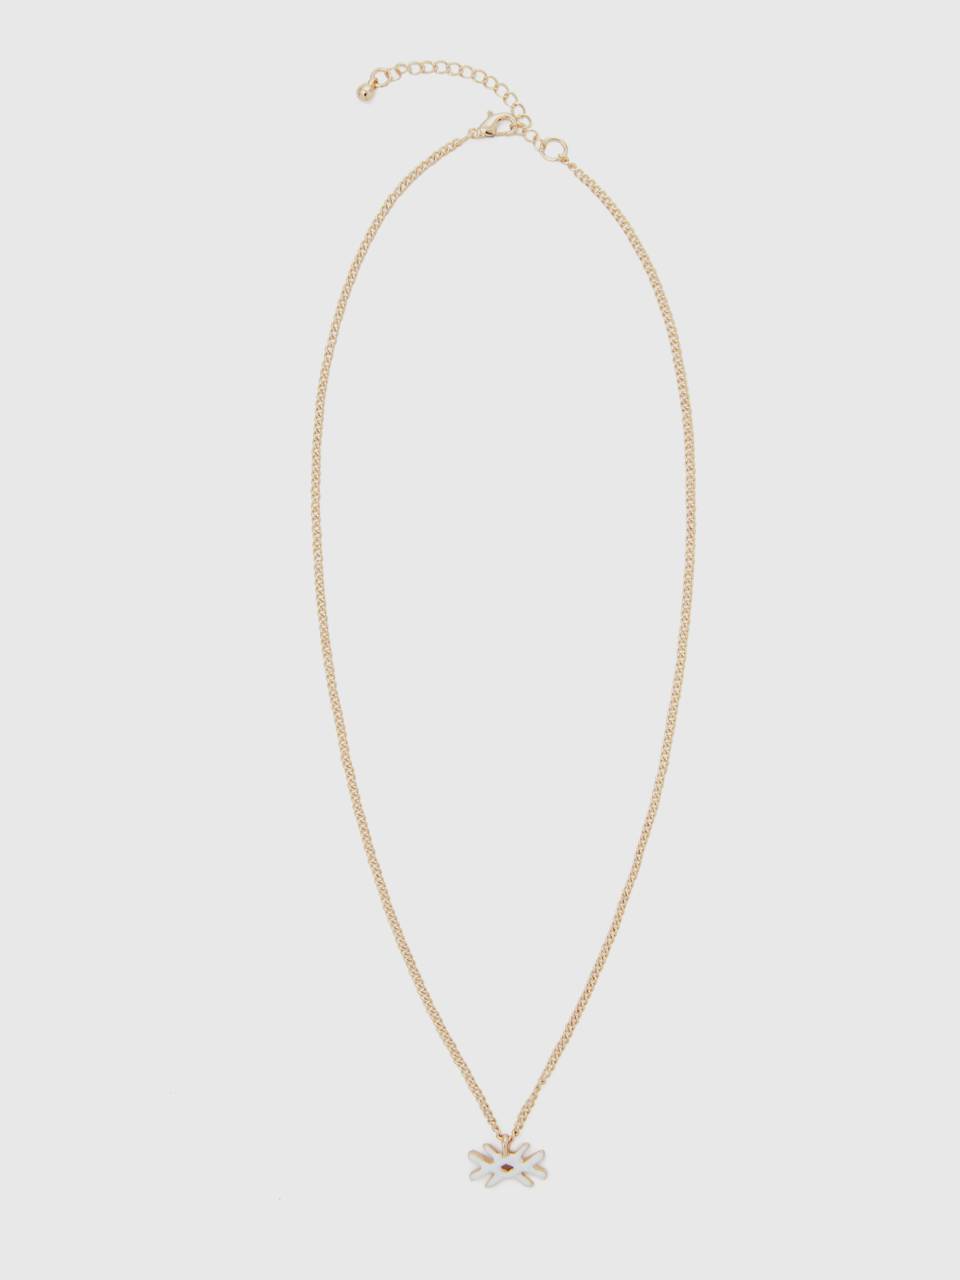 30mm Gold Plated Circle Monogram Pendant Necklace